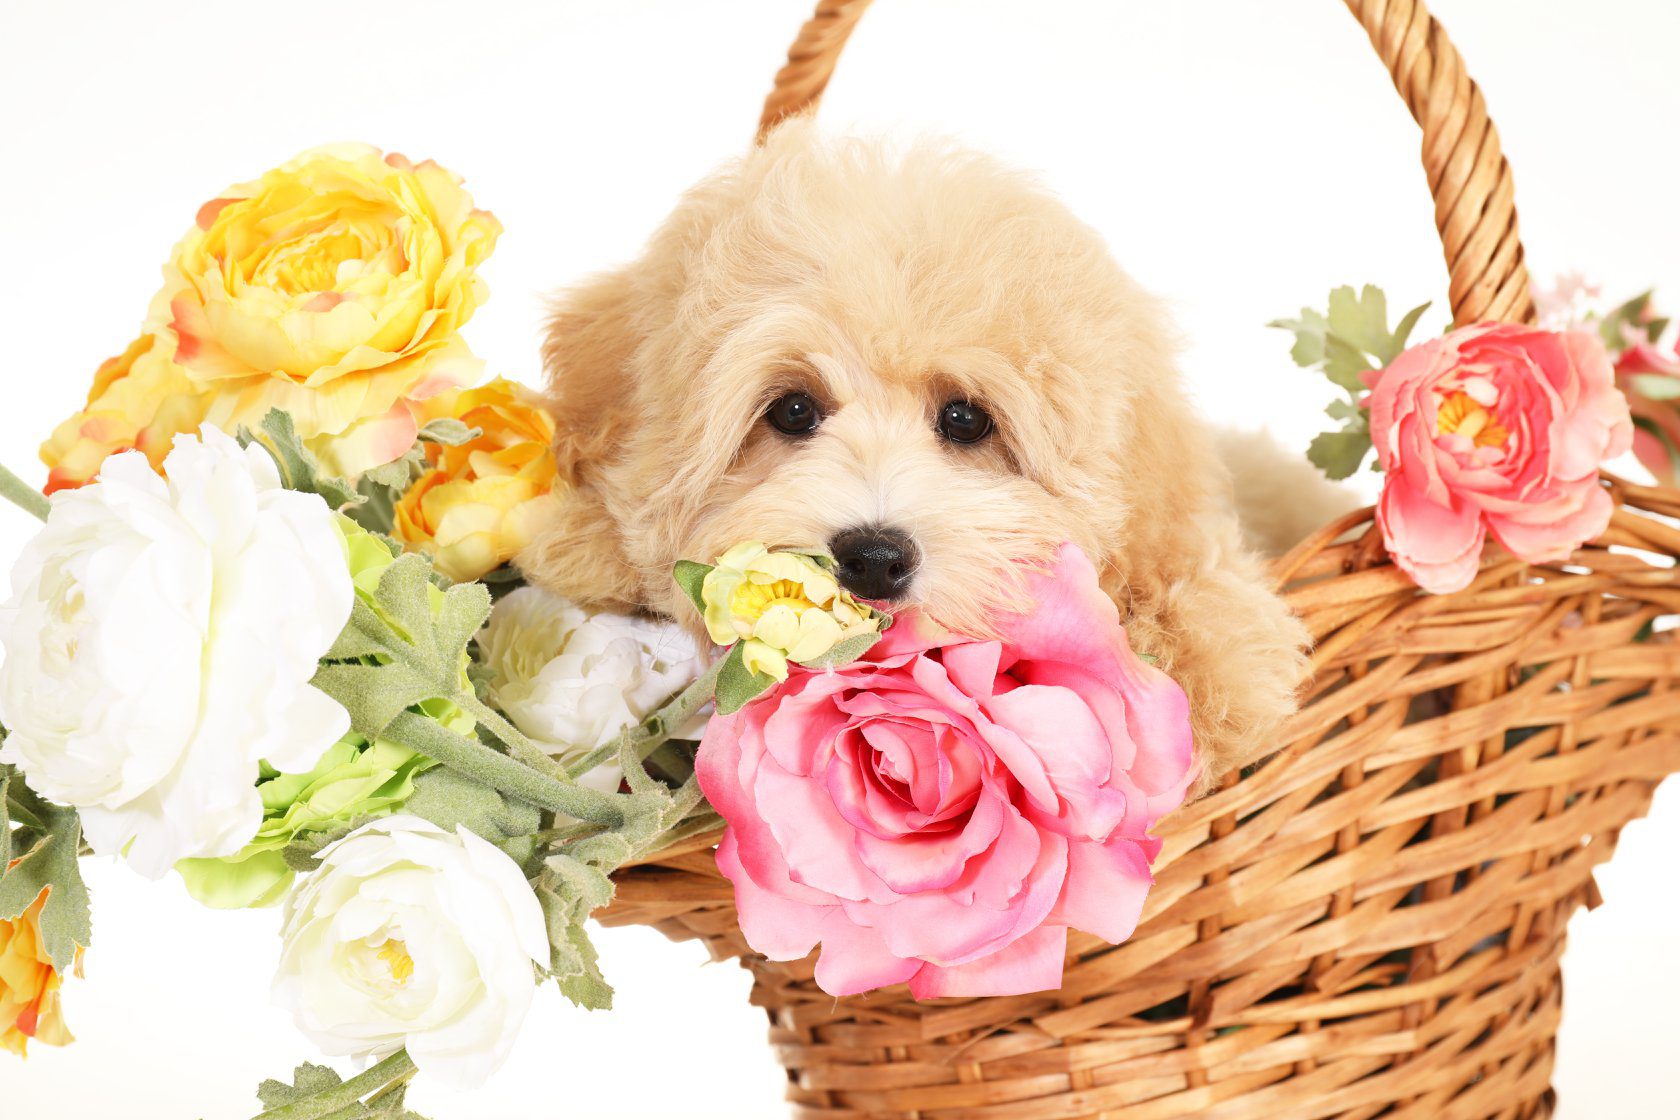 Goldendoodle puppy in wicker basket with flowers